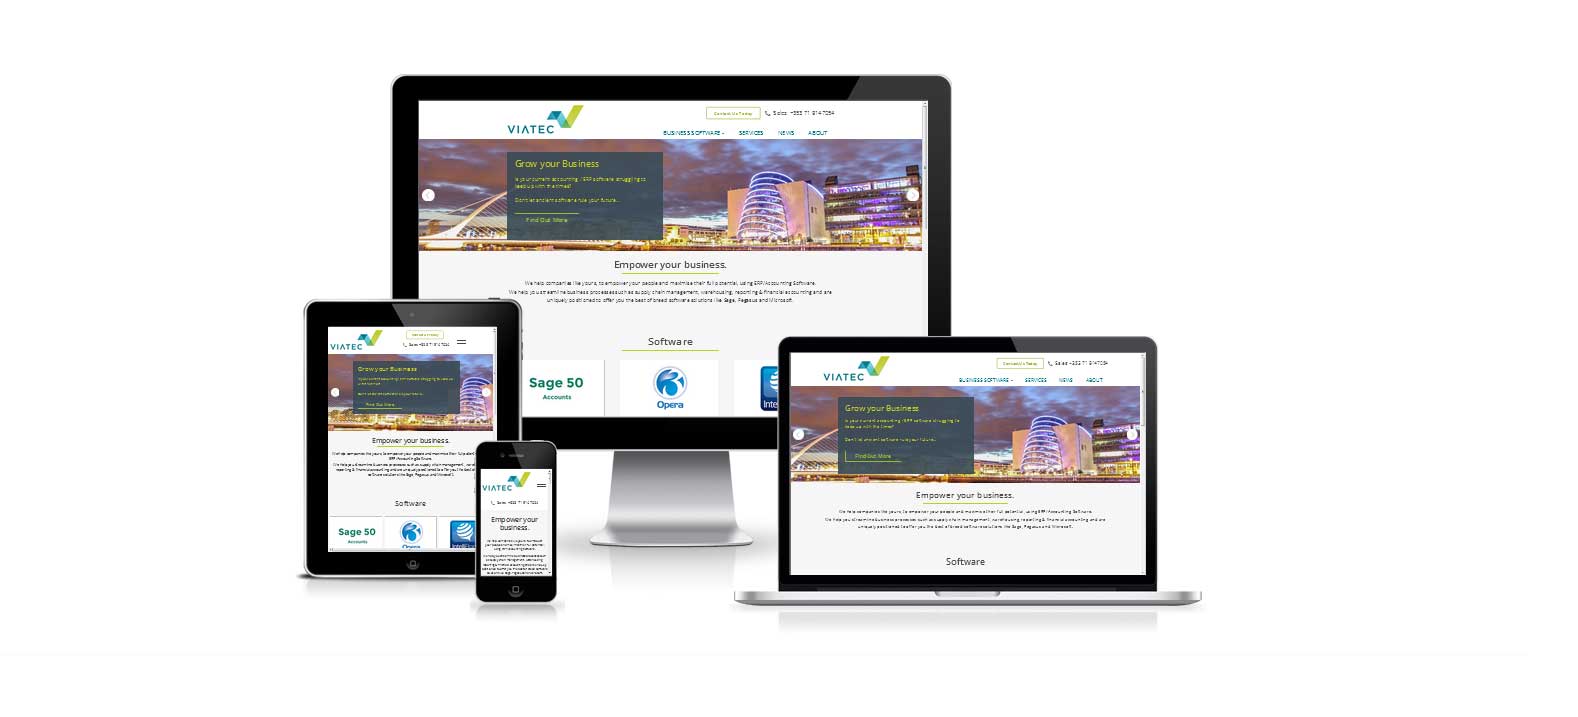 New website for Viatec Business Solutions